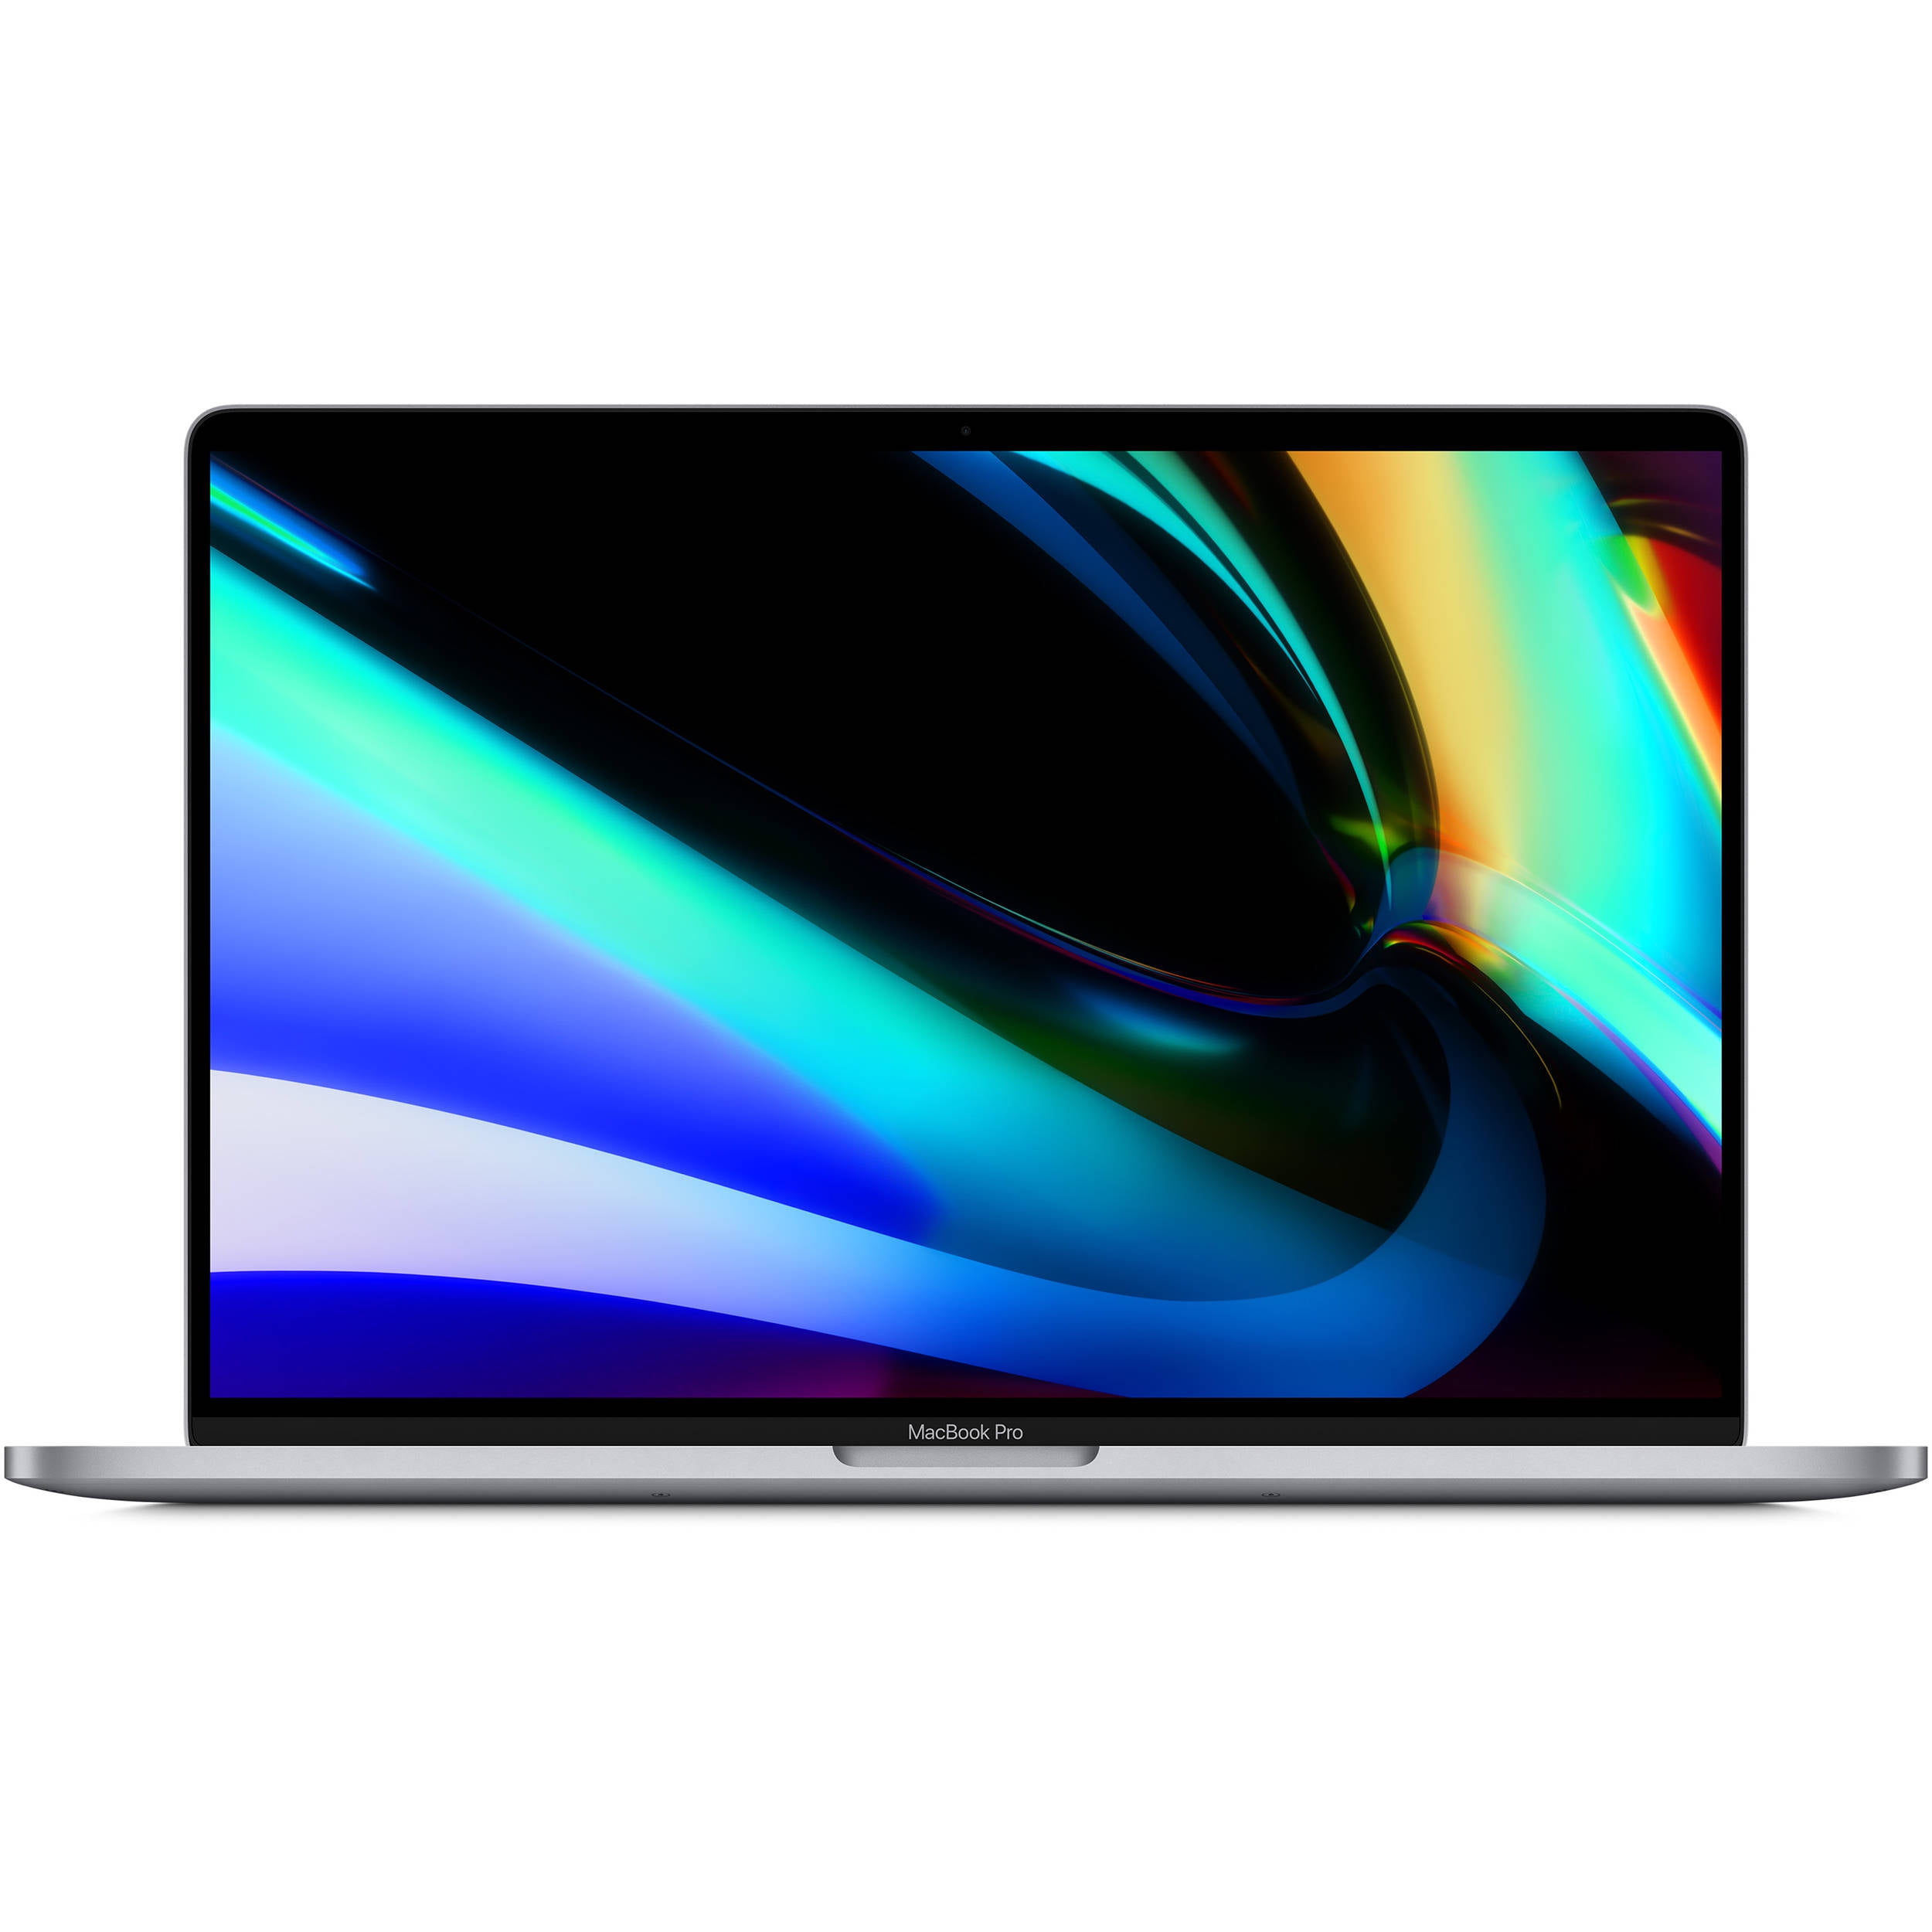 Apple MacBook Pro 16 Inch Display Mid 2019 IntelCore i7 16GB Memory AMD 512GB SSD with Touch Bar Space Gray - MVVJ2LL/A (Late 2019)